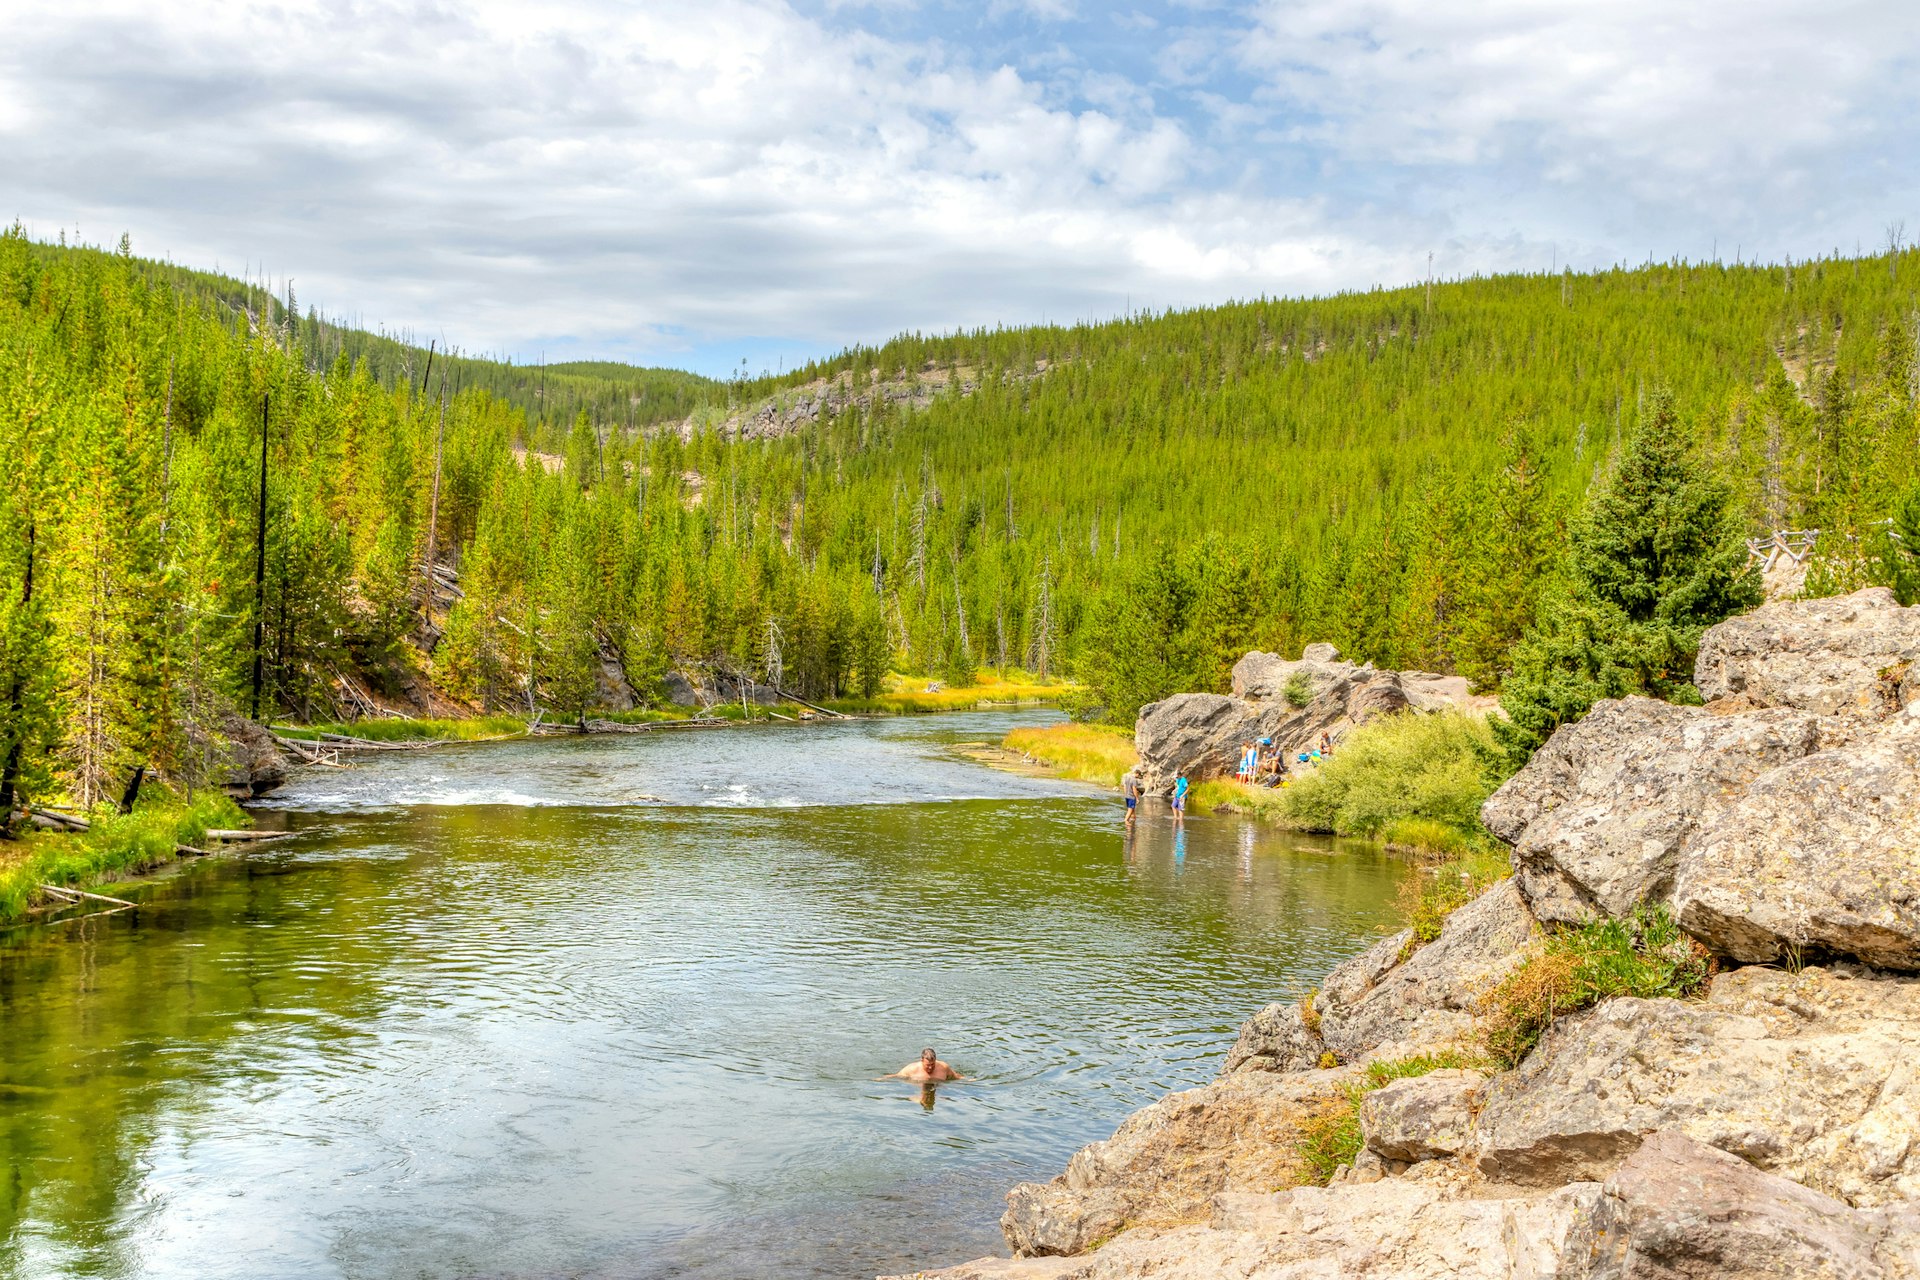 A solo swimmer in Firehole River, surrounded by dense forest